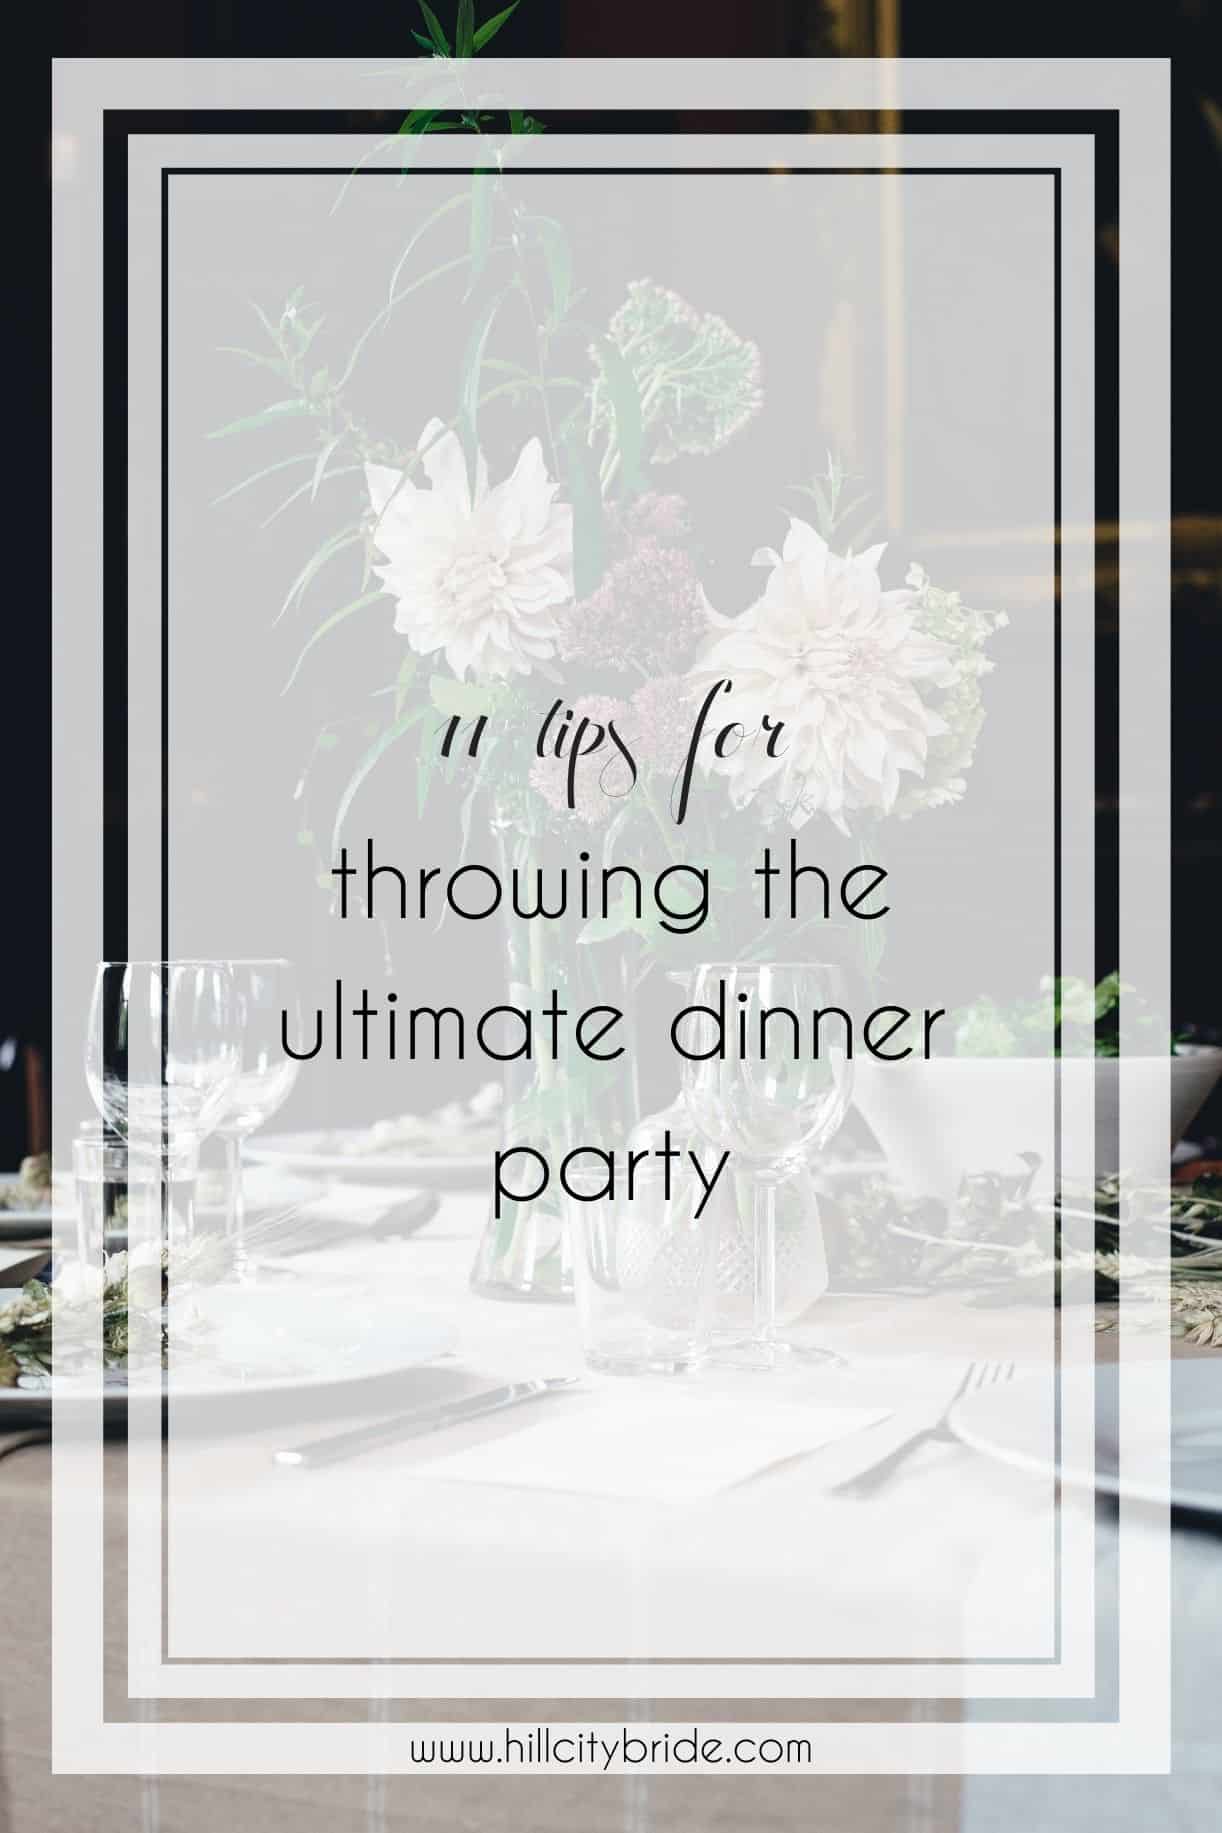 11 Easy Tips for Throwing the Ultimate Dinner Party